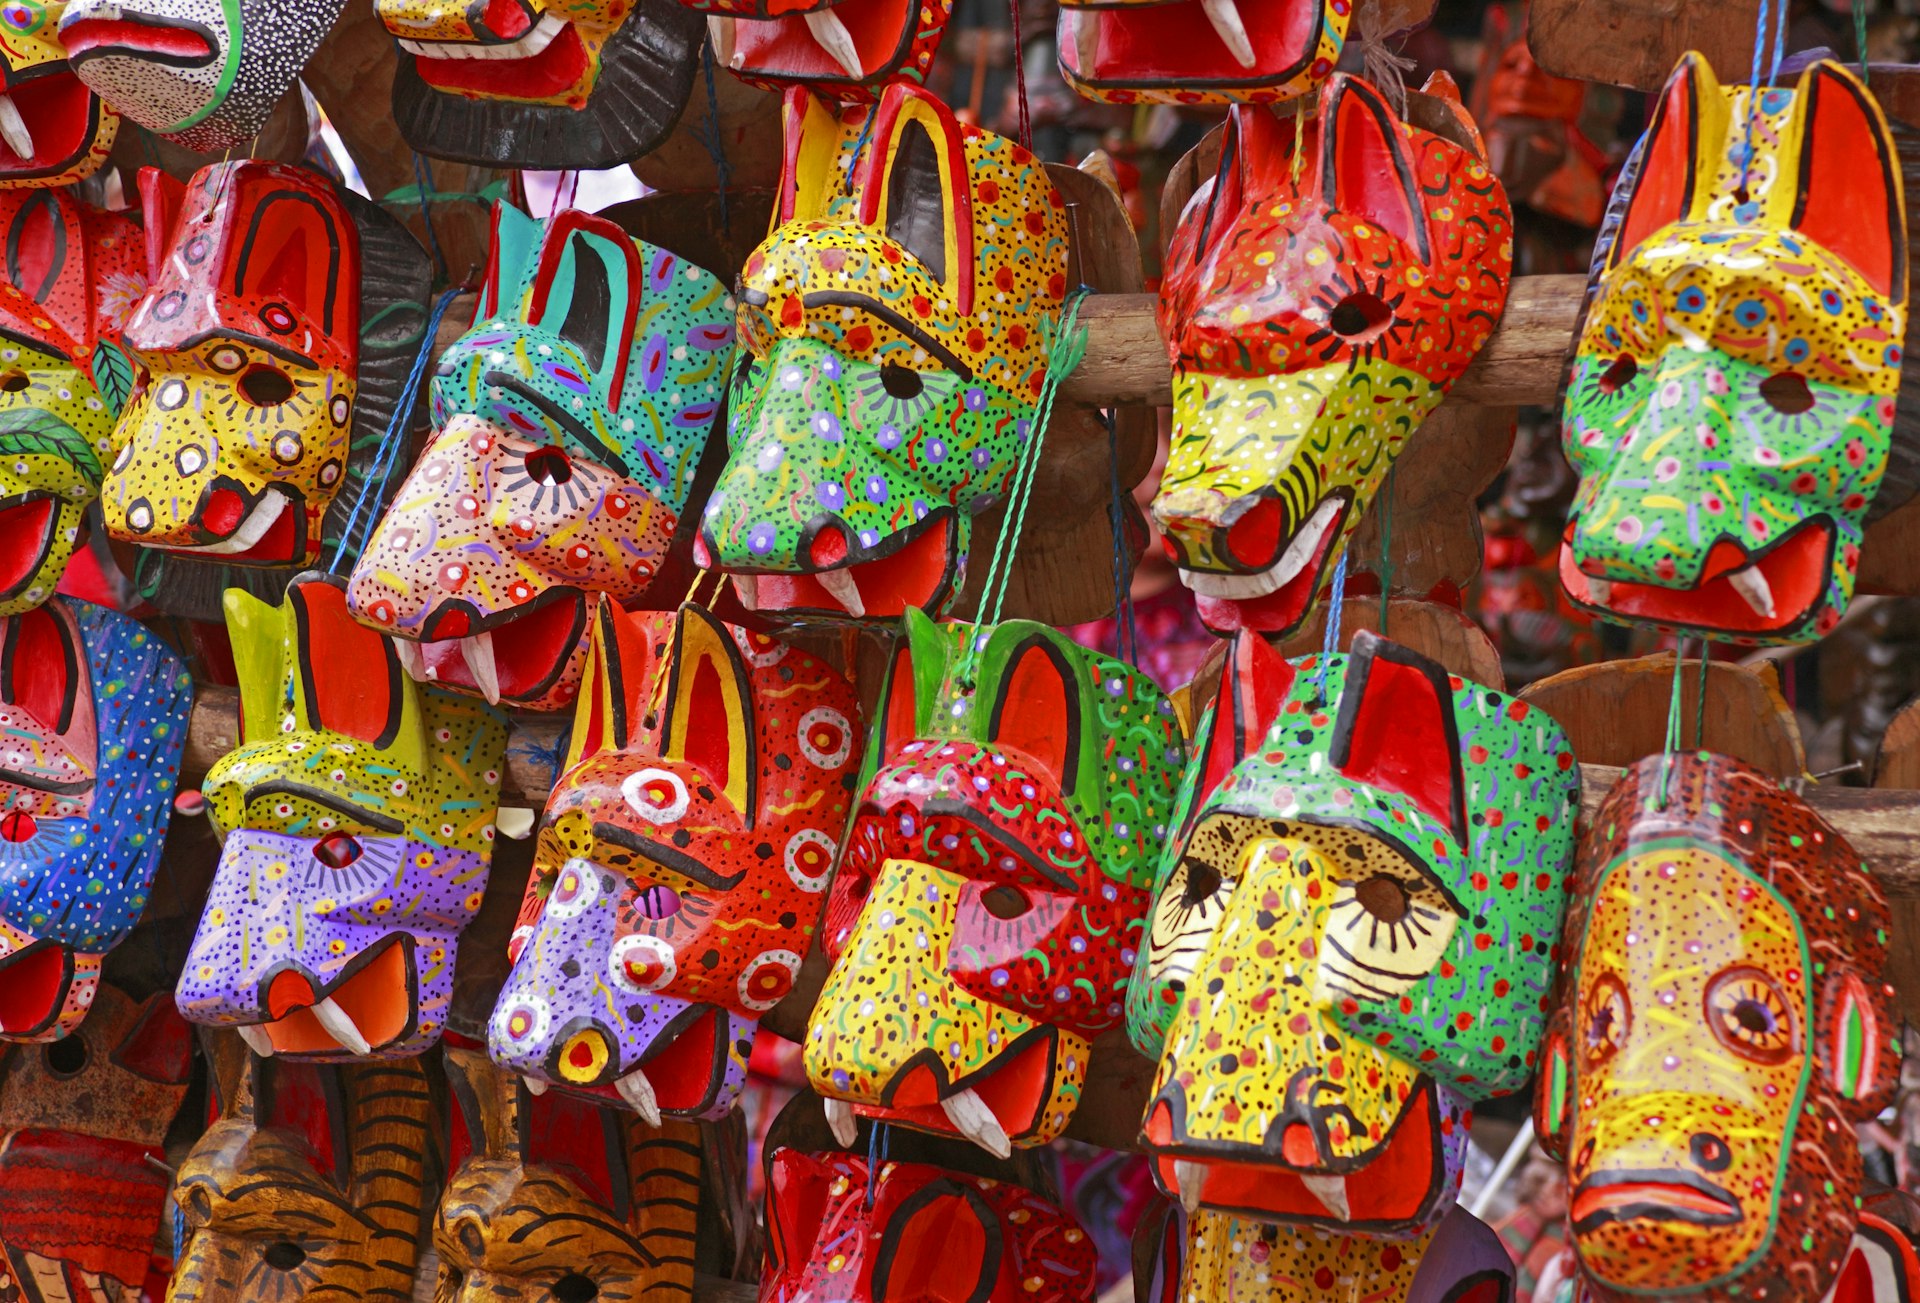 Colorful wooden masks in the shapes of animals hang on a wall at the Chichicastenango Market